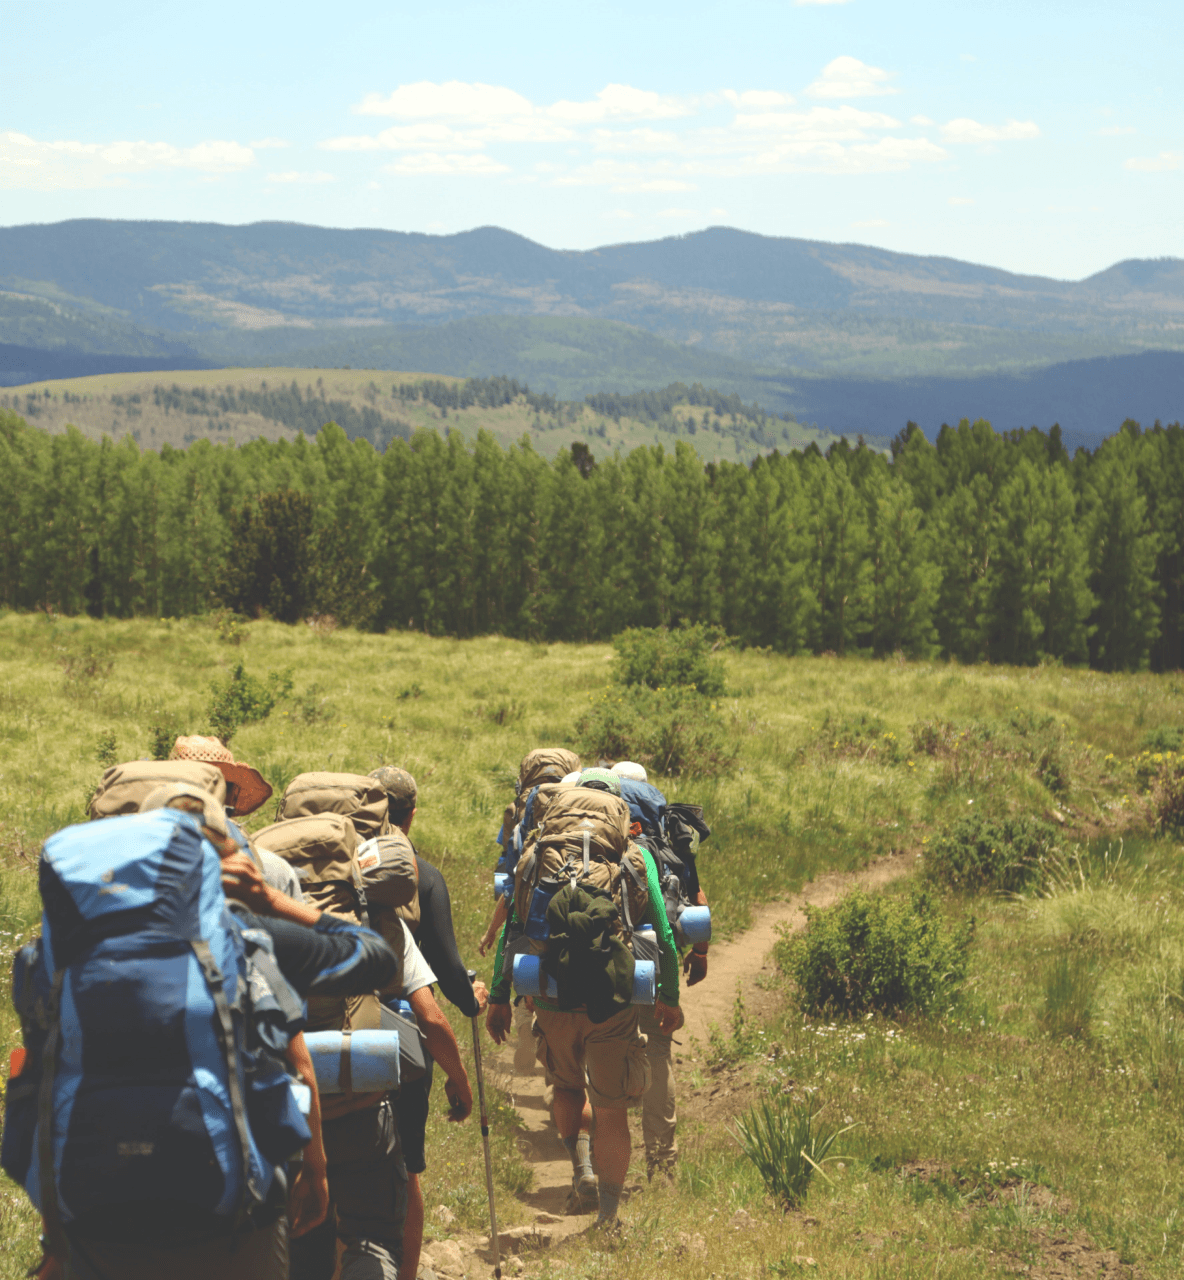 Experience the joy of hiking with a group of people while interning at Spiky. Our inclusive and collaborative environment will help you find your way.